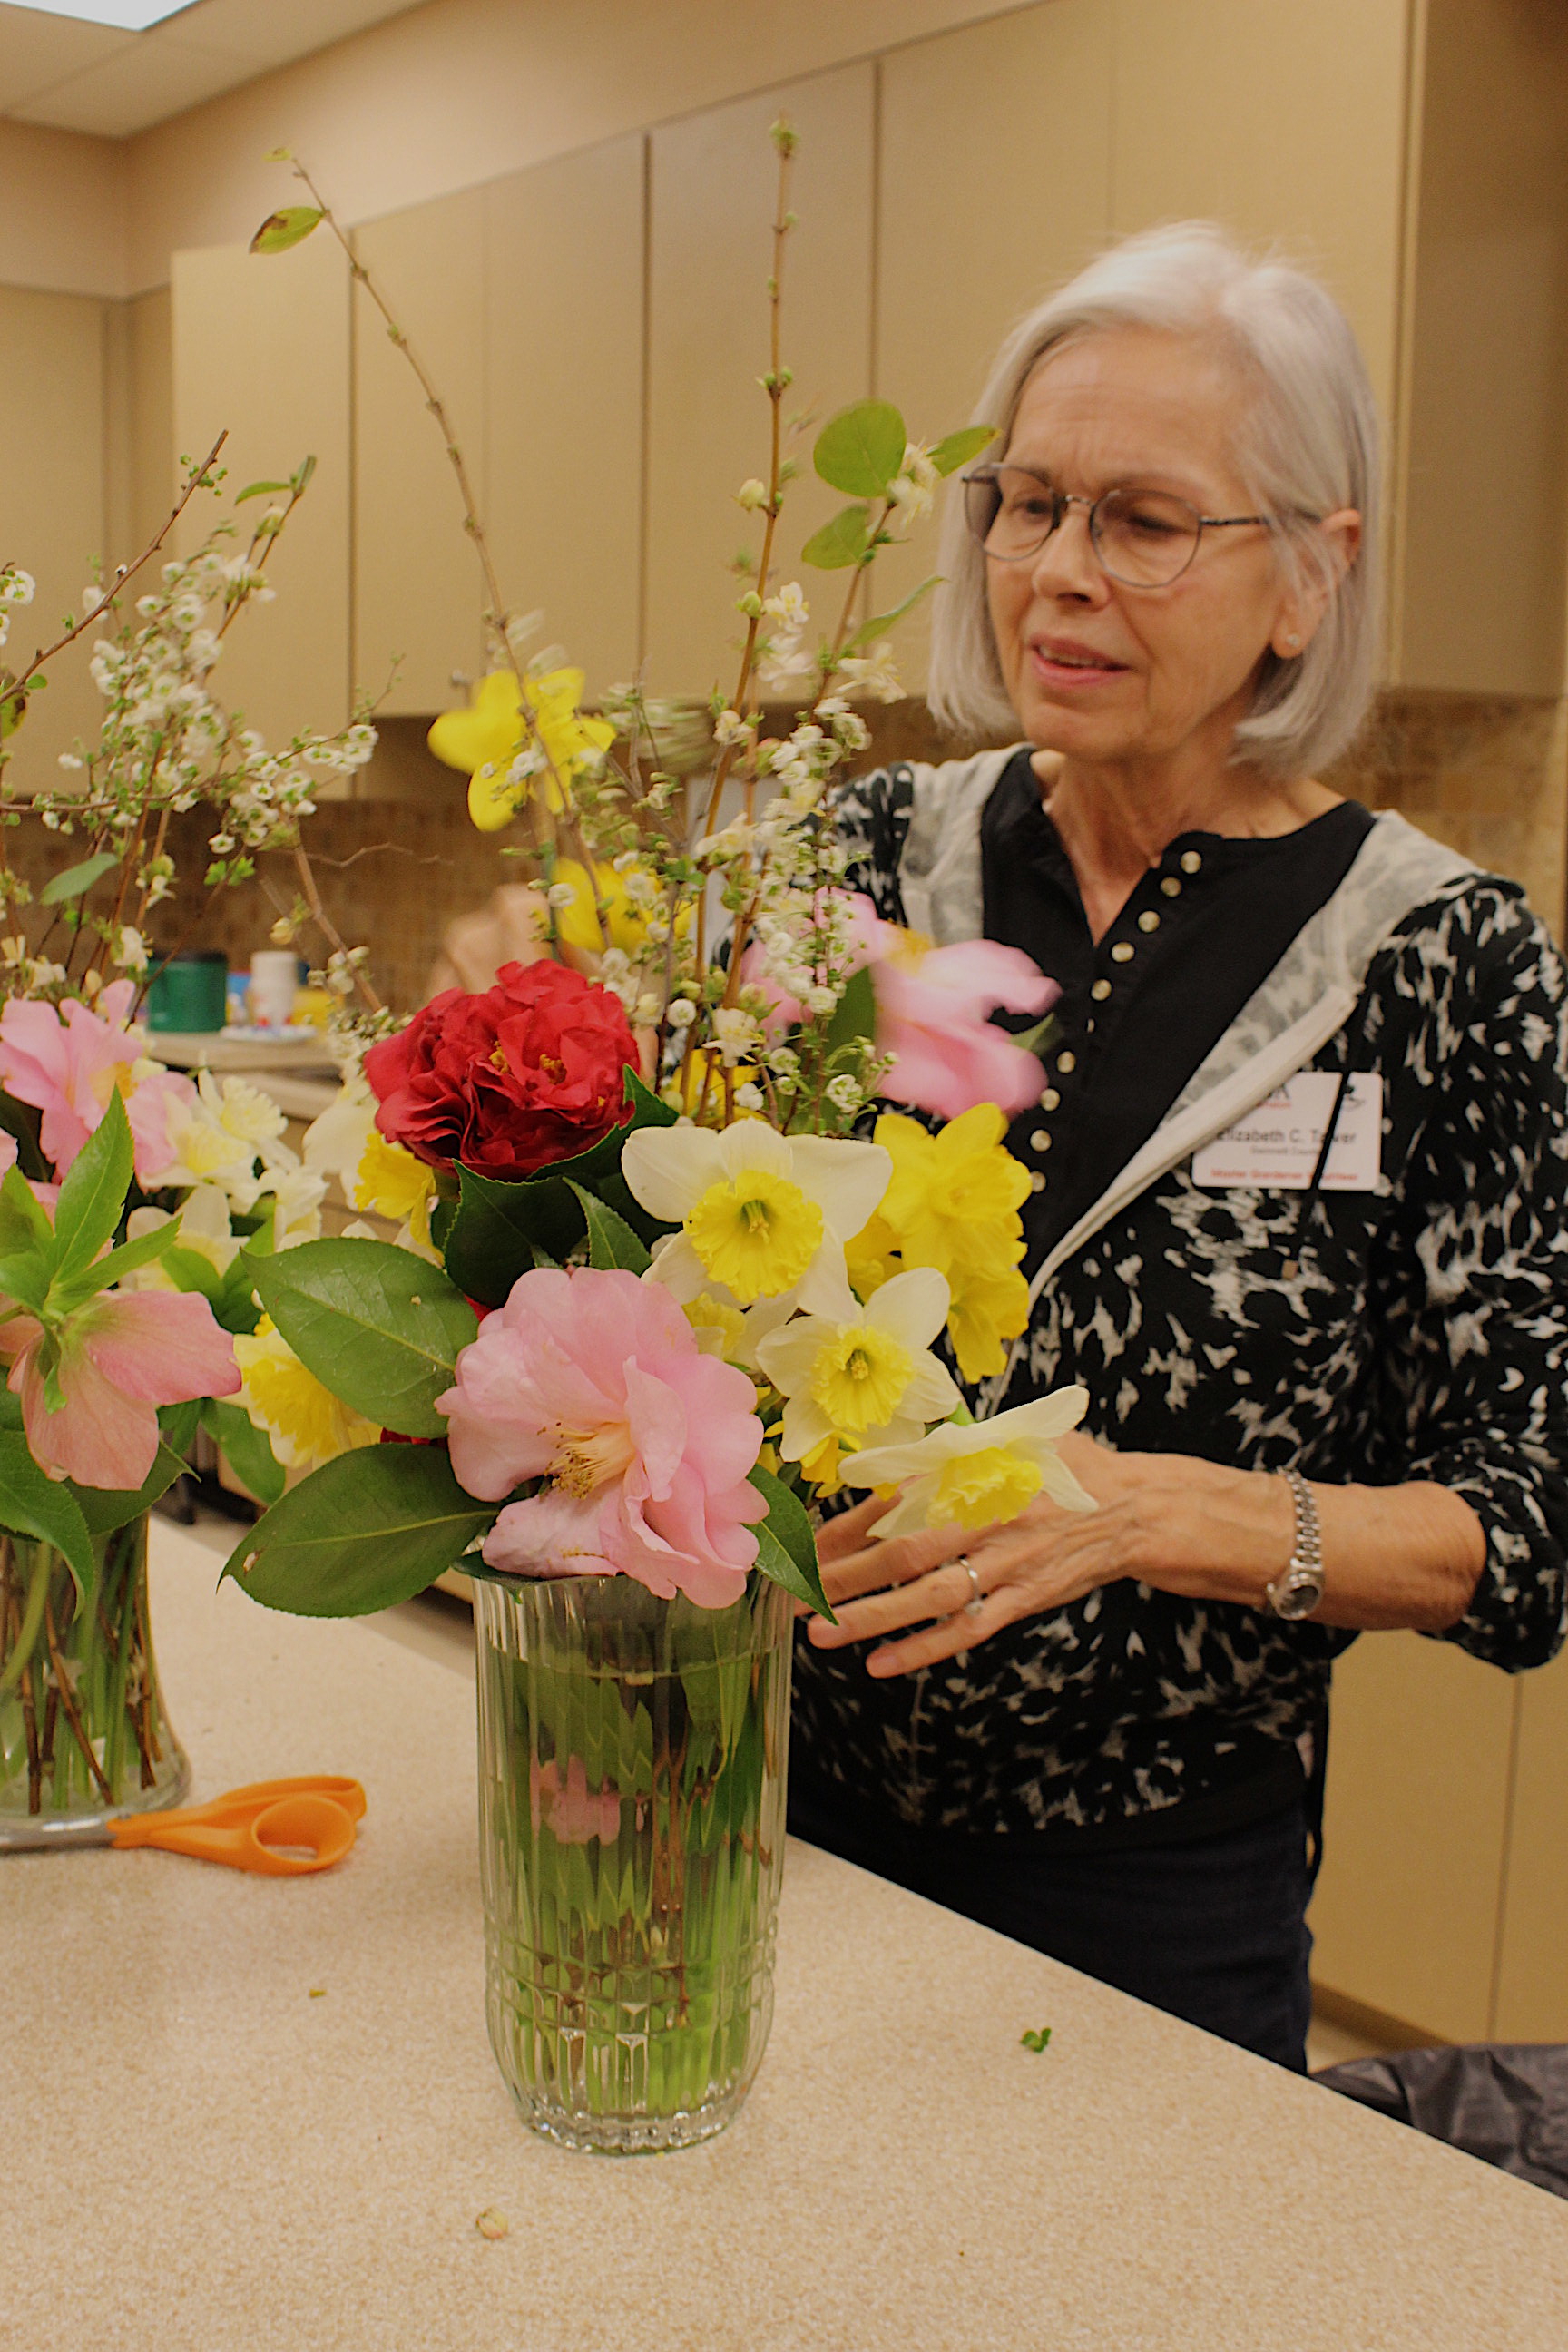 Our talented floral artist at work to grace our tables with beauty and fragrance